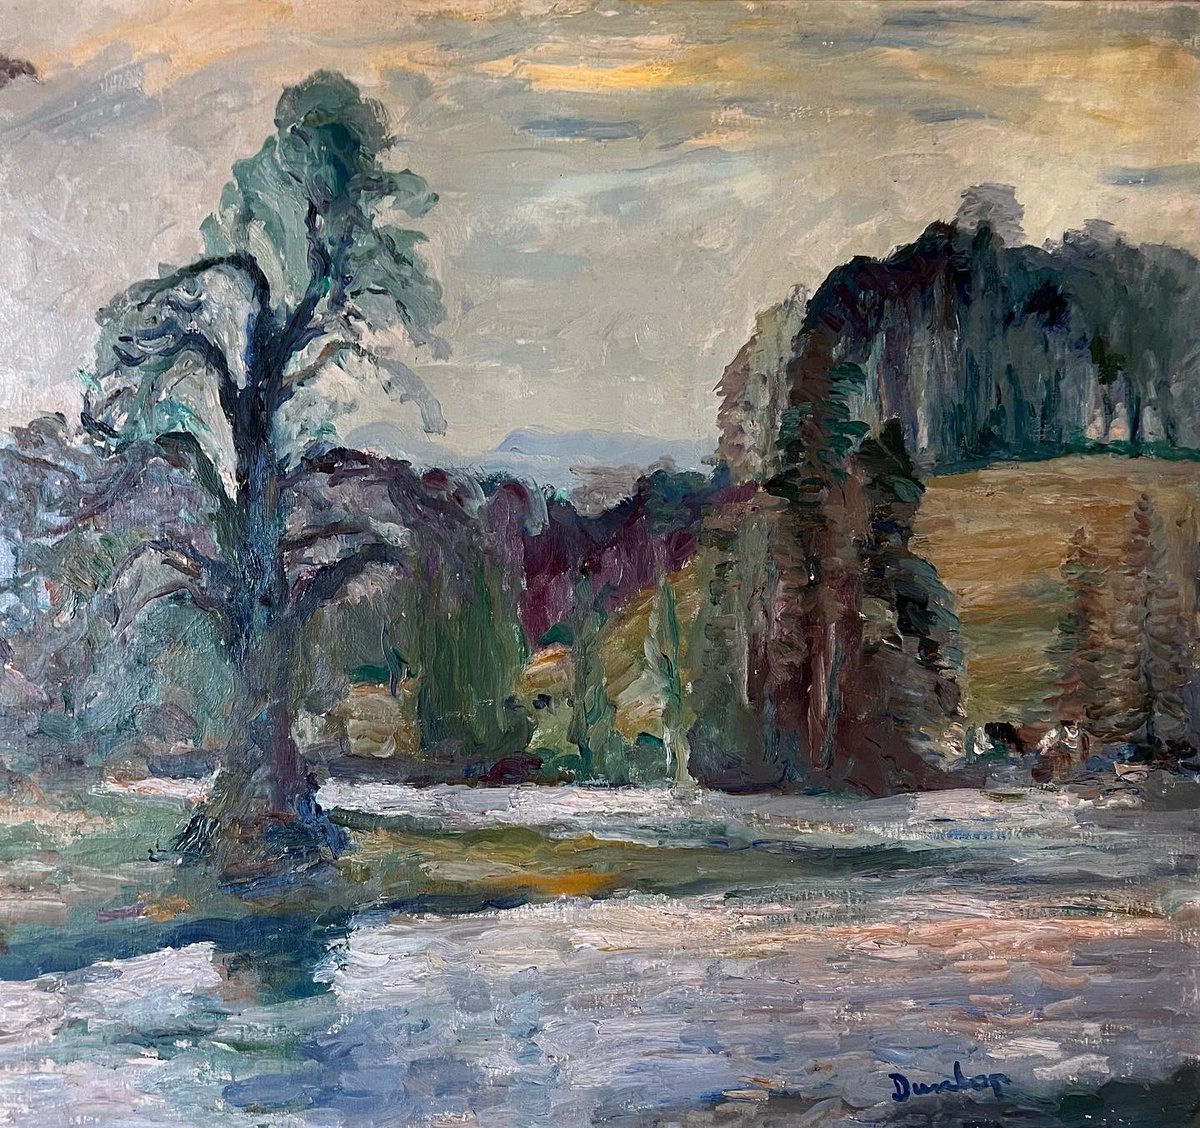 Ronald Ossory Dunlop was born in #ireland. He painted heavily #impastoed canvases with a palette knife. Towards the end of his life he switched to a sable brush. Even so his paintings remained heavily impastoed like #petworthpark below which went to the #royalacademy in 1967.